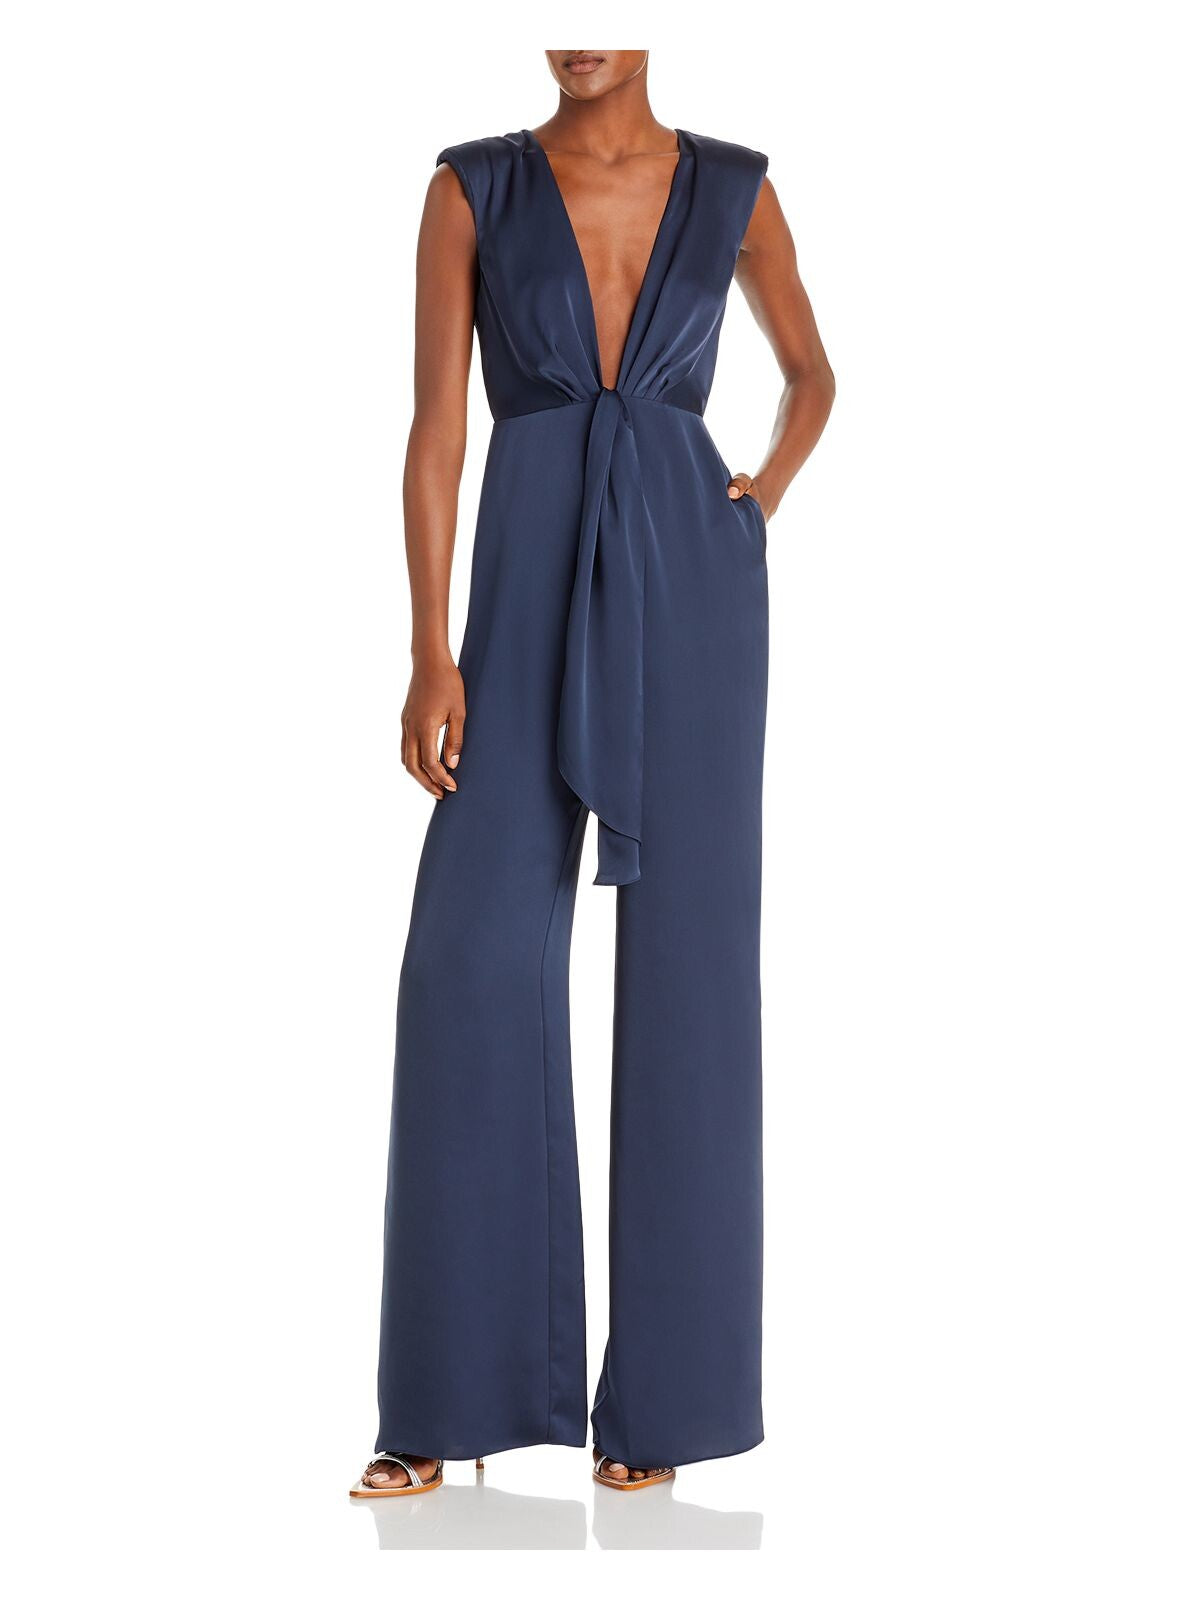 RAMY BROOK Womens Navy Zippered Pocketed Plunging Shoulder Pads Sleeveless V Neck Evening Wide Leg Jumpsuit 4